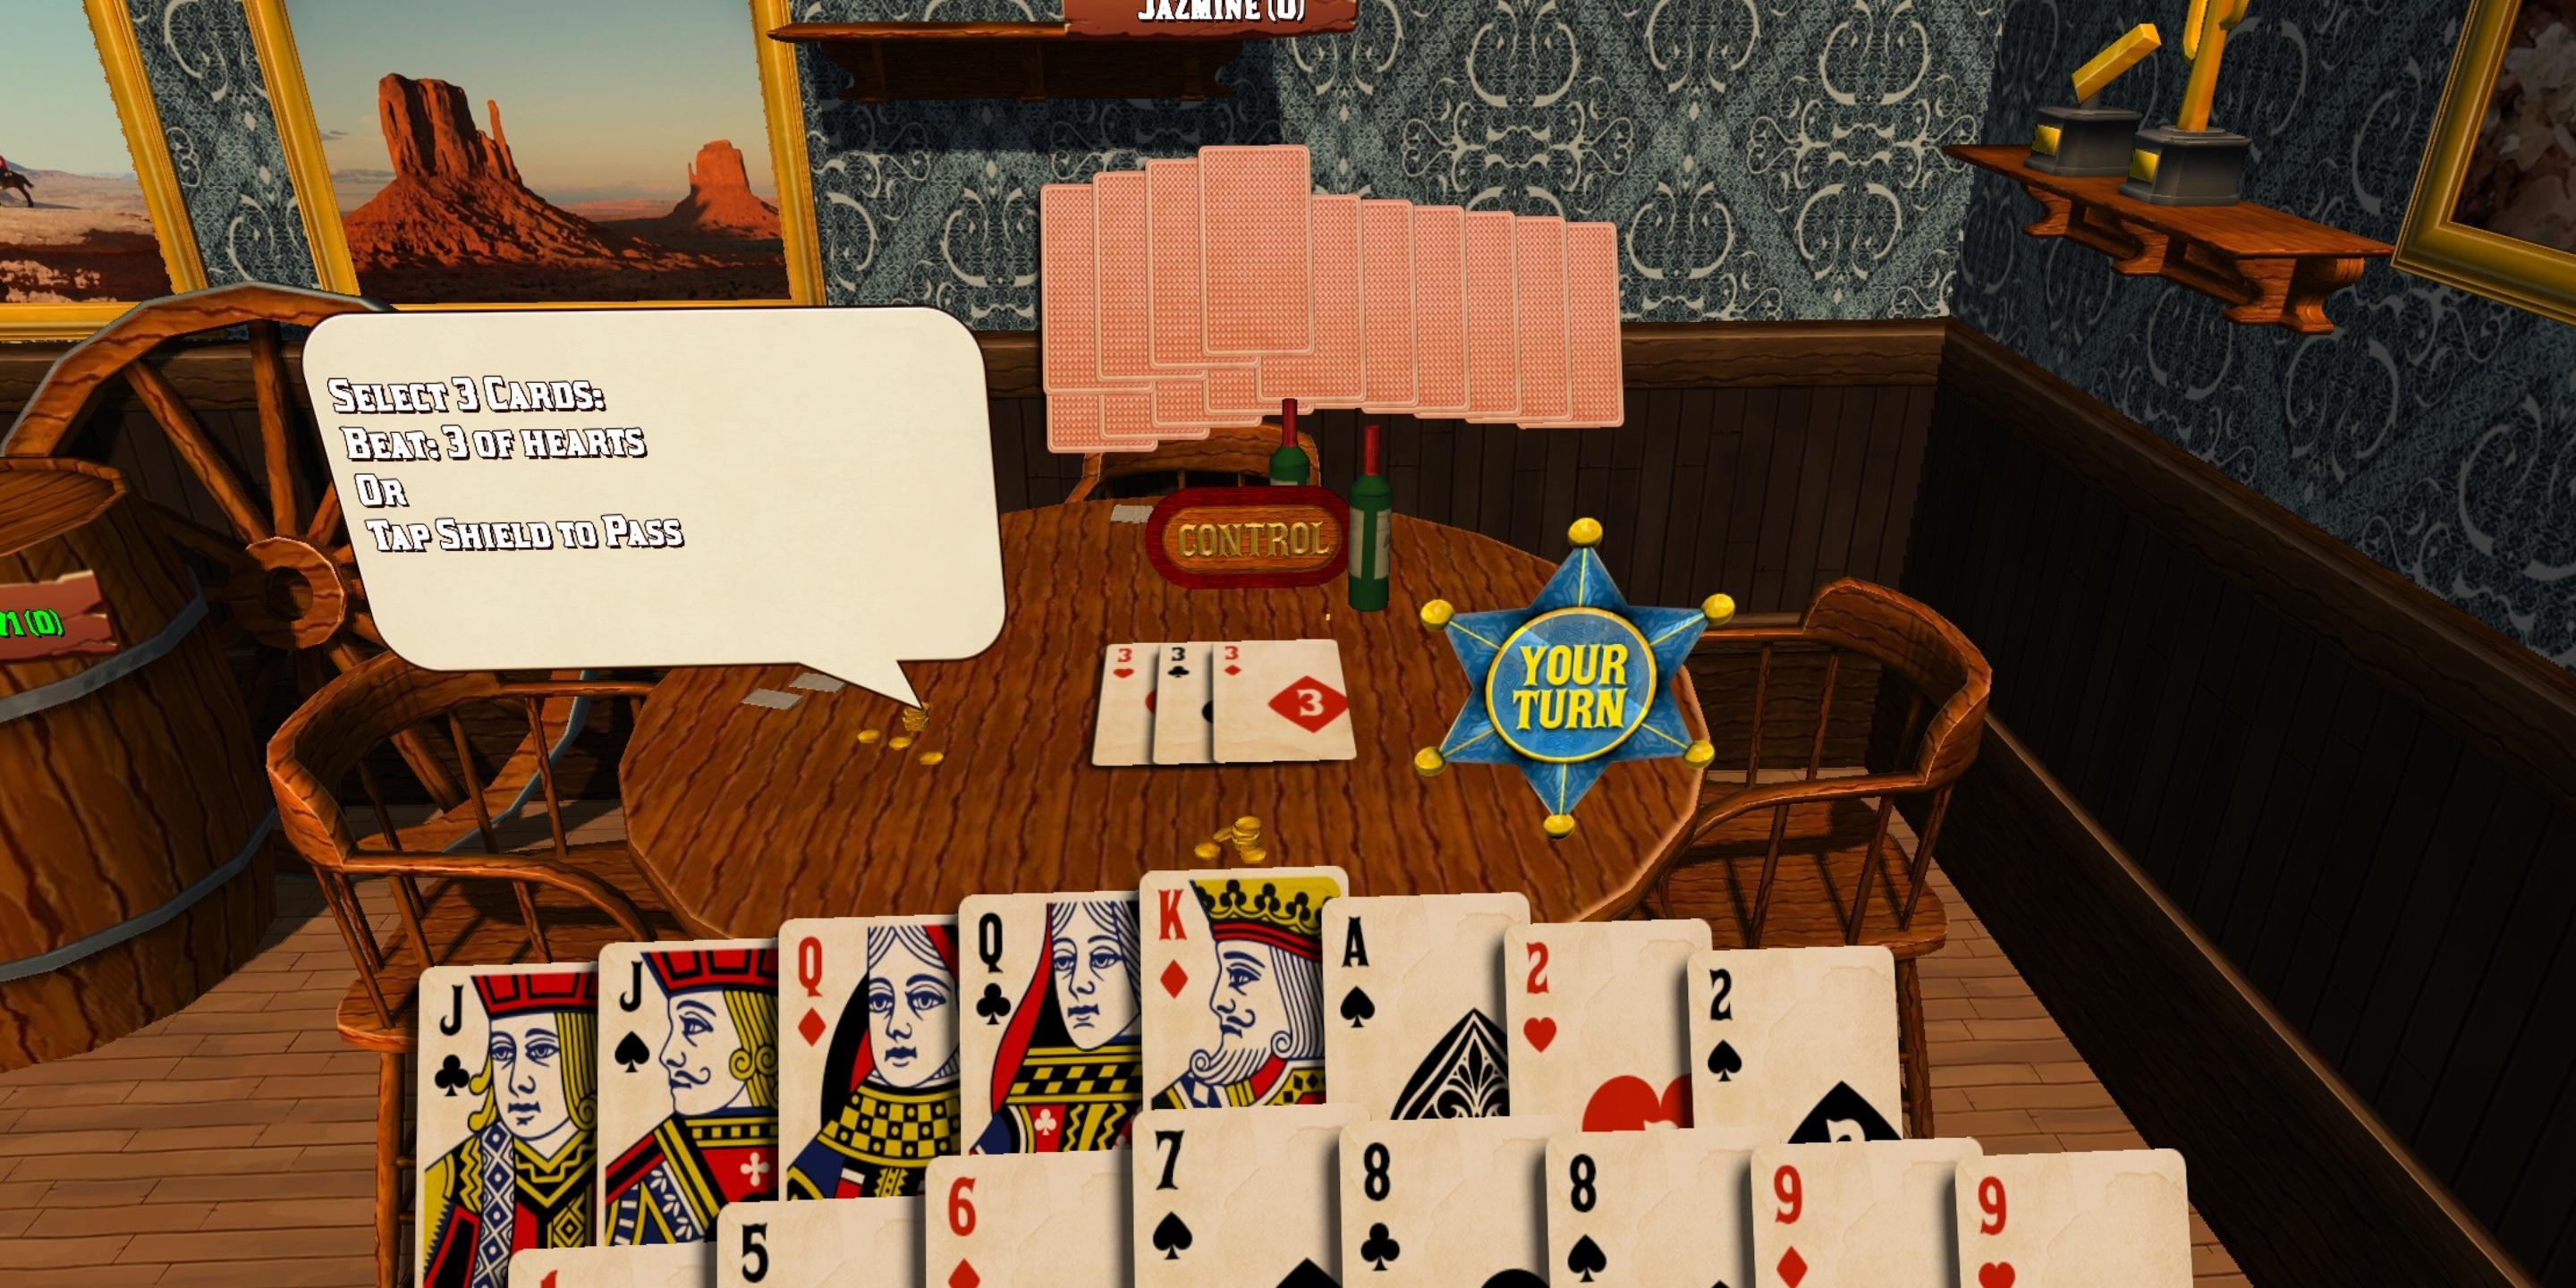 Card rooms